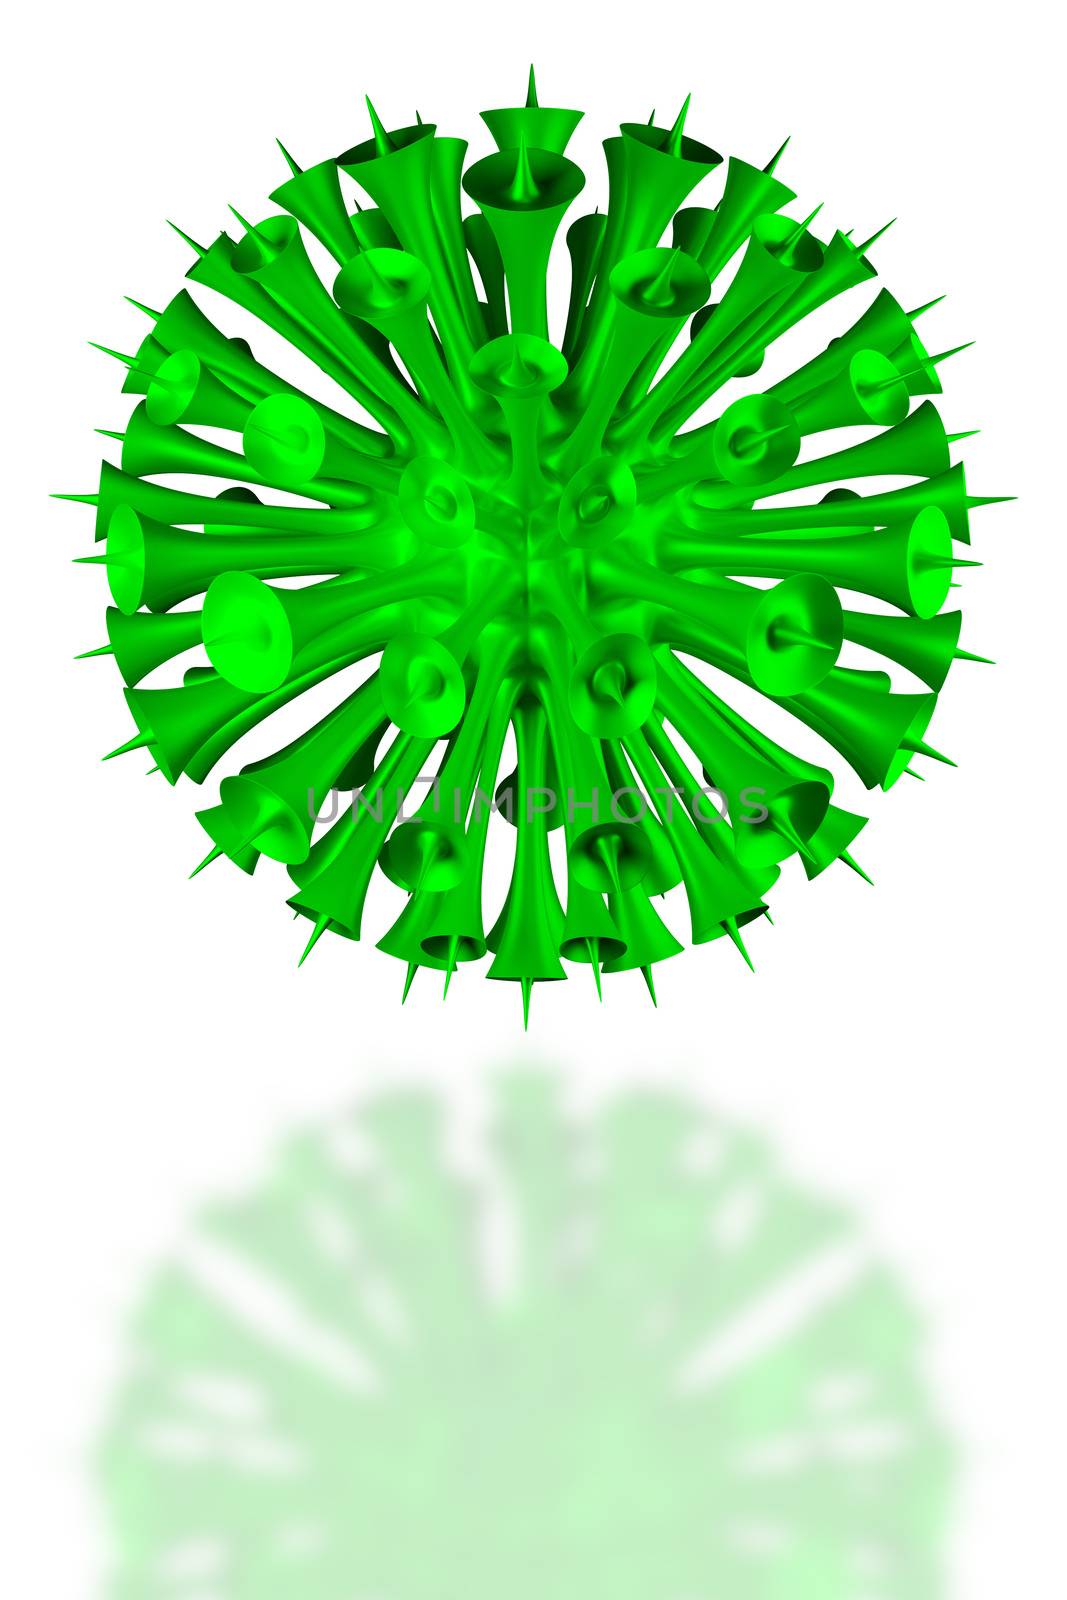 Illustration of a fictitious green virus on white background